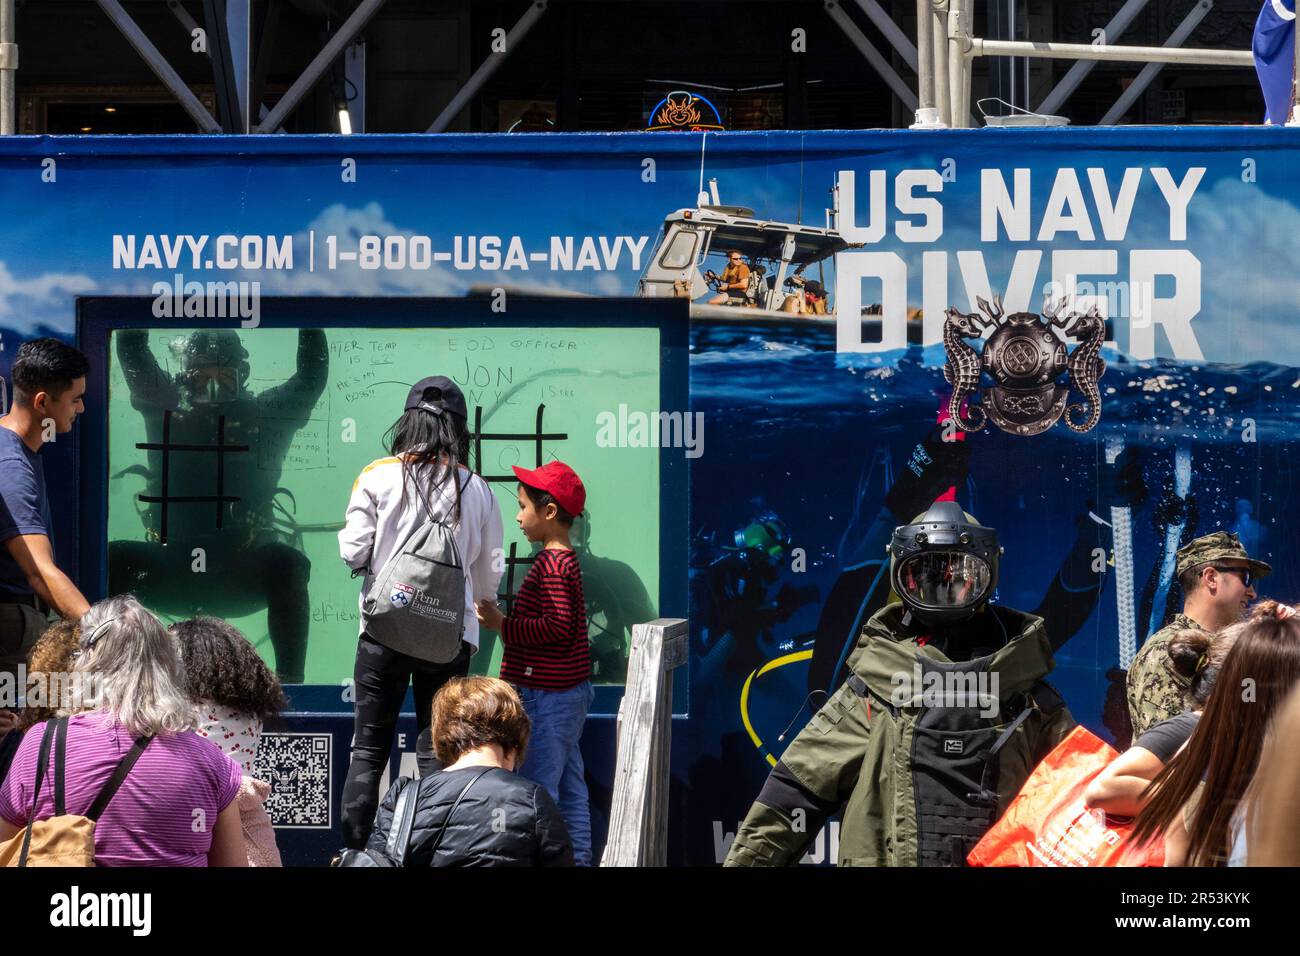 Crowds gather for fleet week in Times Square at the US Navy underwater diver tank, 2023, New York City, United States Stock Photo